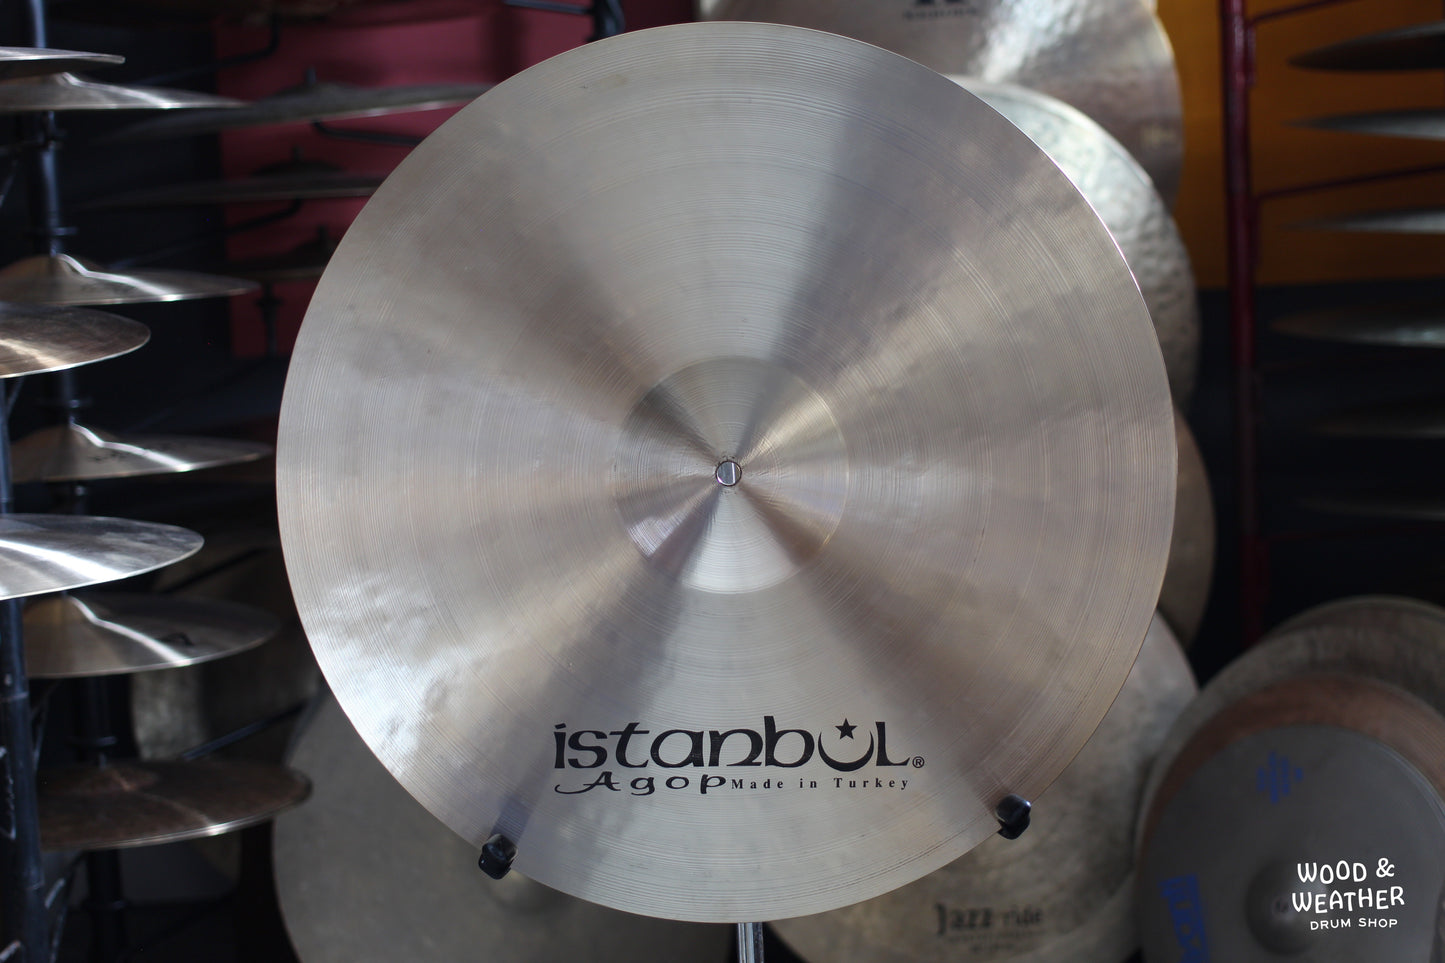 Istanbul Agop 20" Xist Natural Ride Cymbal 2420g